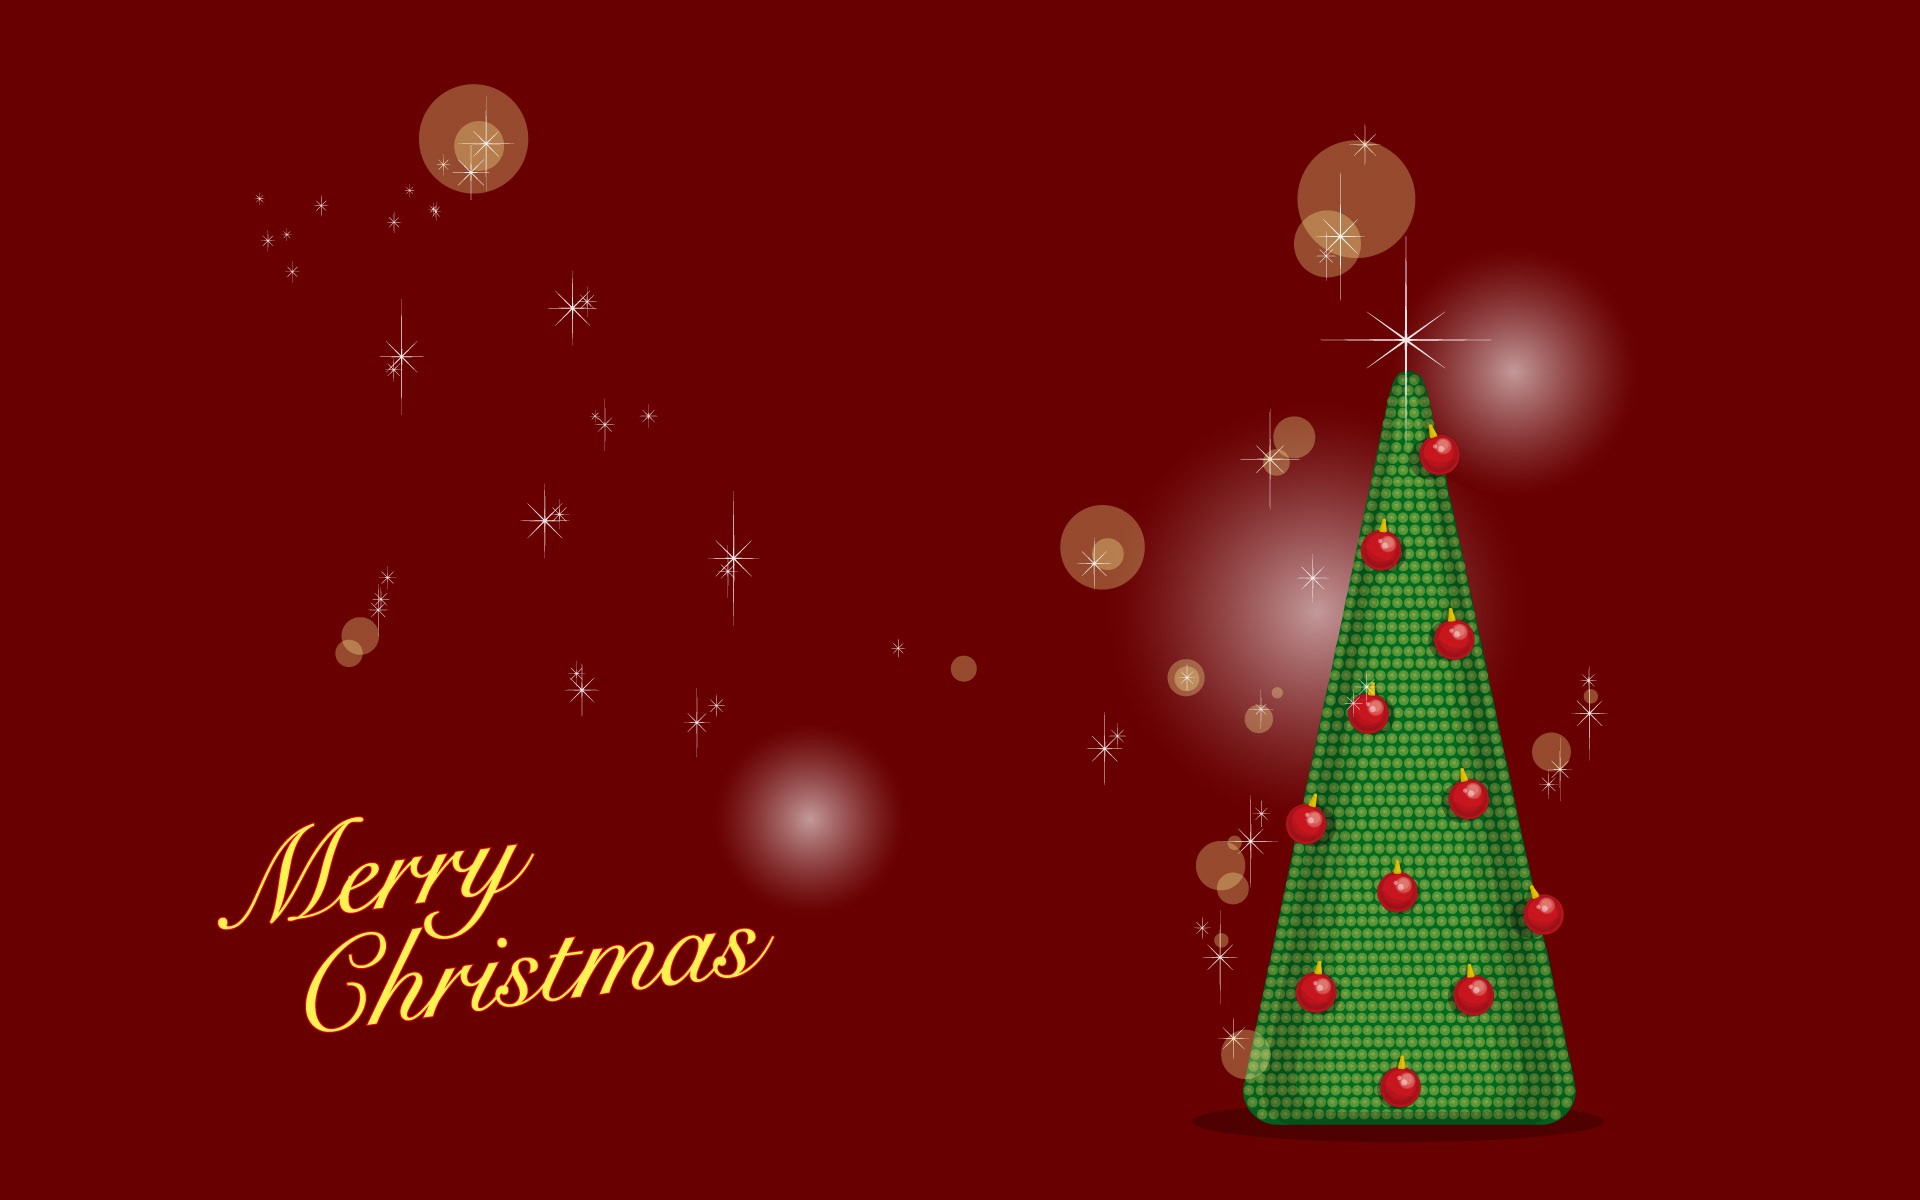 Exquisite Christmas Theme HD Wallpapers #21 - 1920x1200